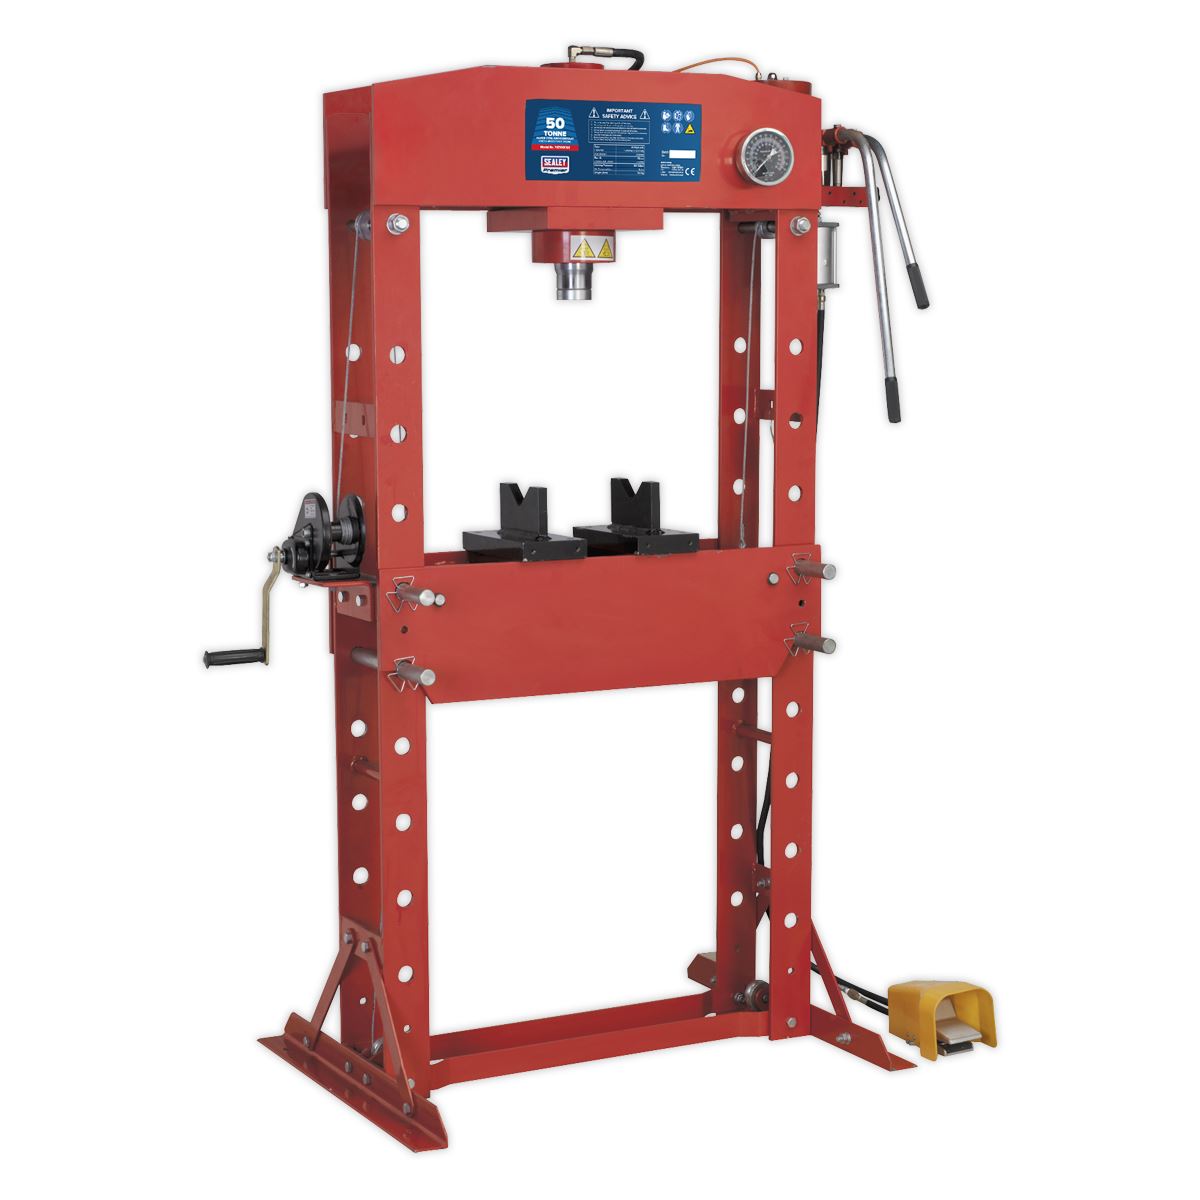 Sealey Premier Air/Hydraulic Press 50 Tonne Floor Type with Foot Pedal